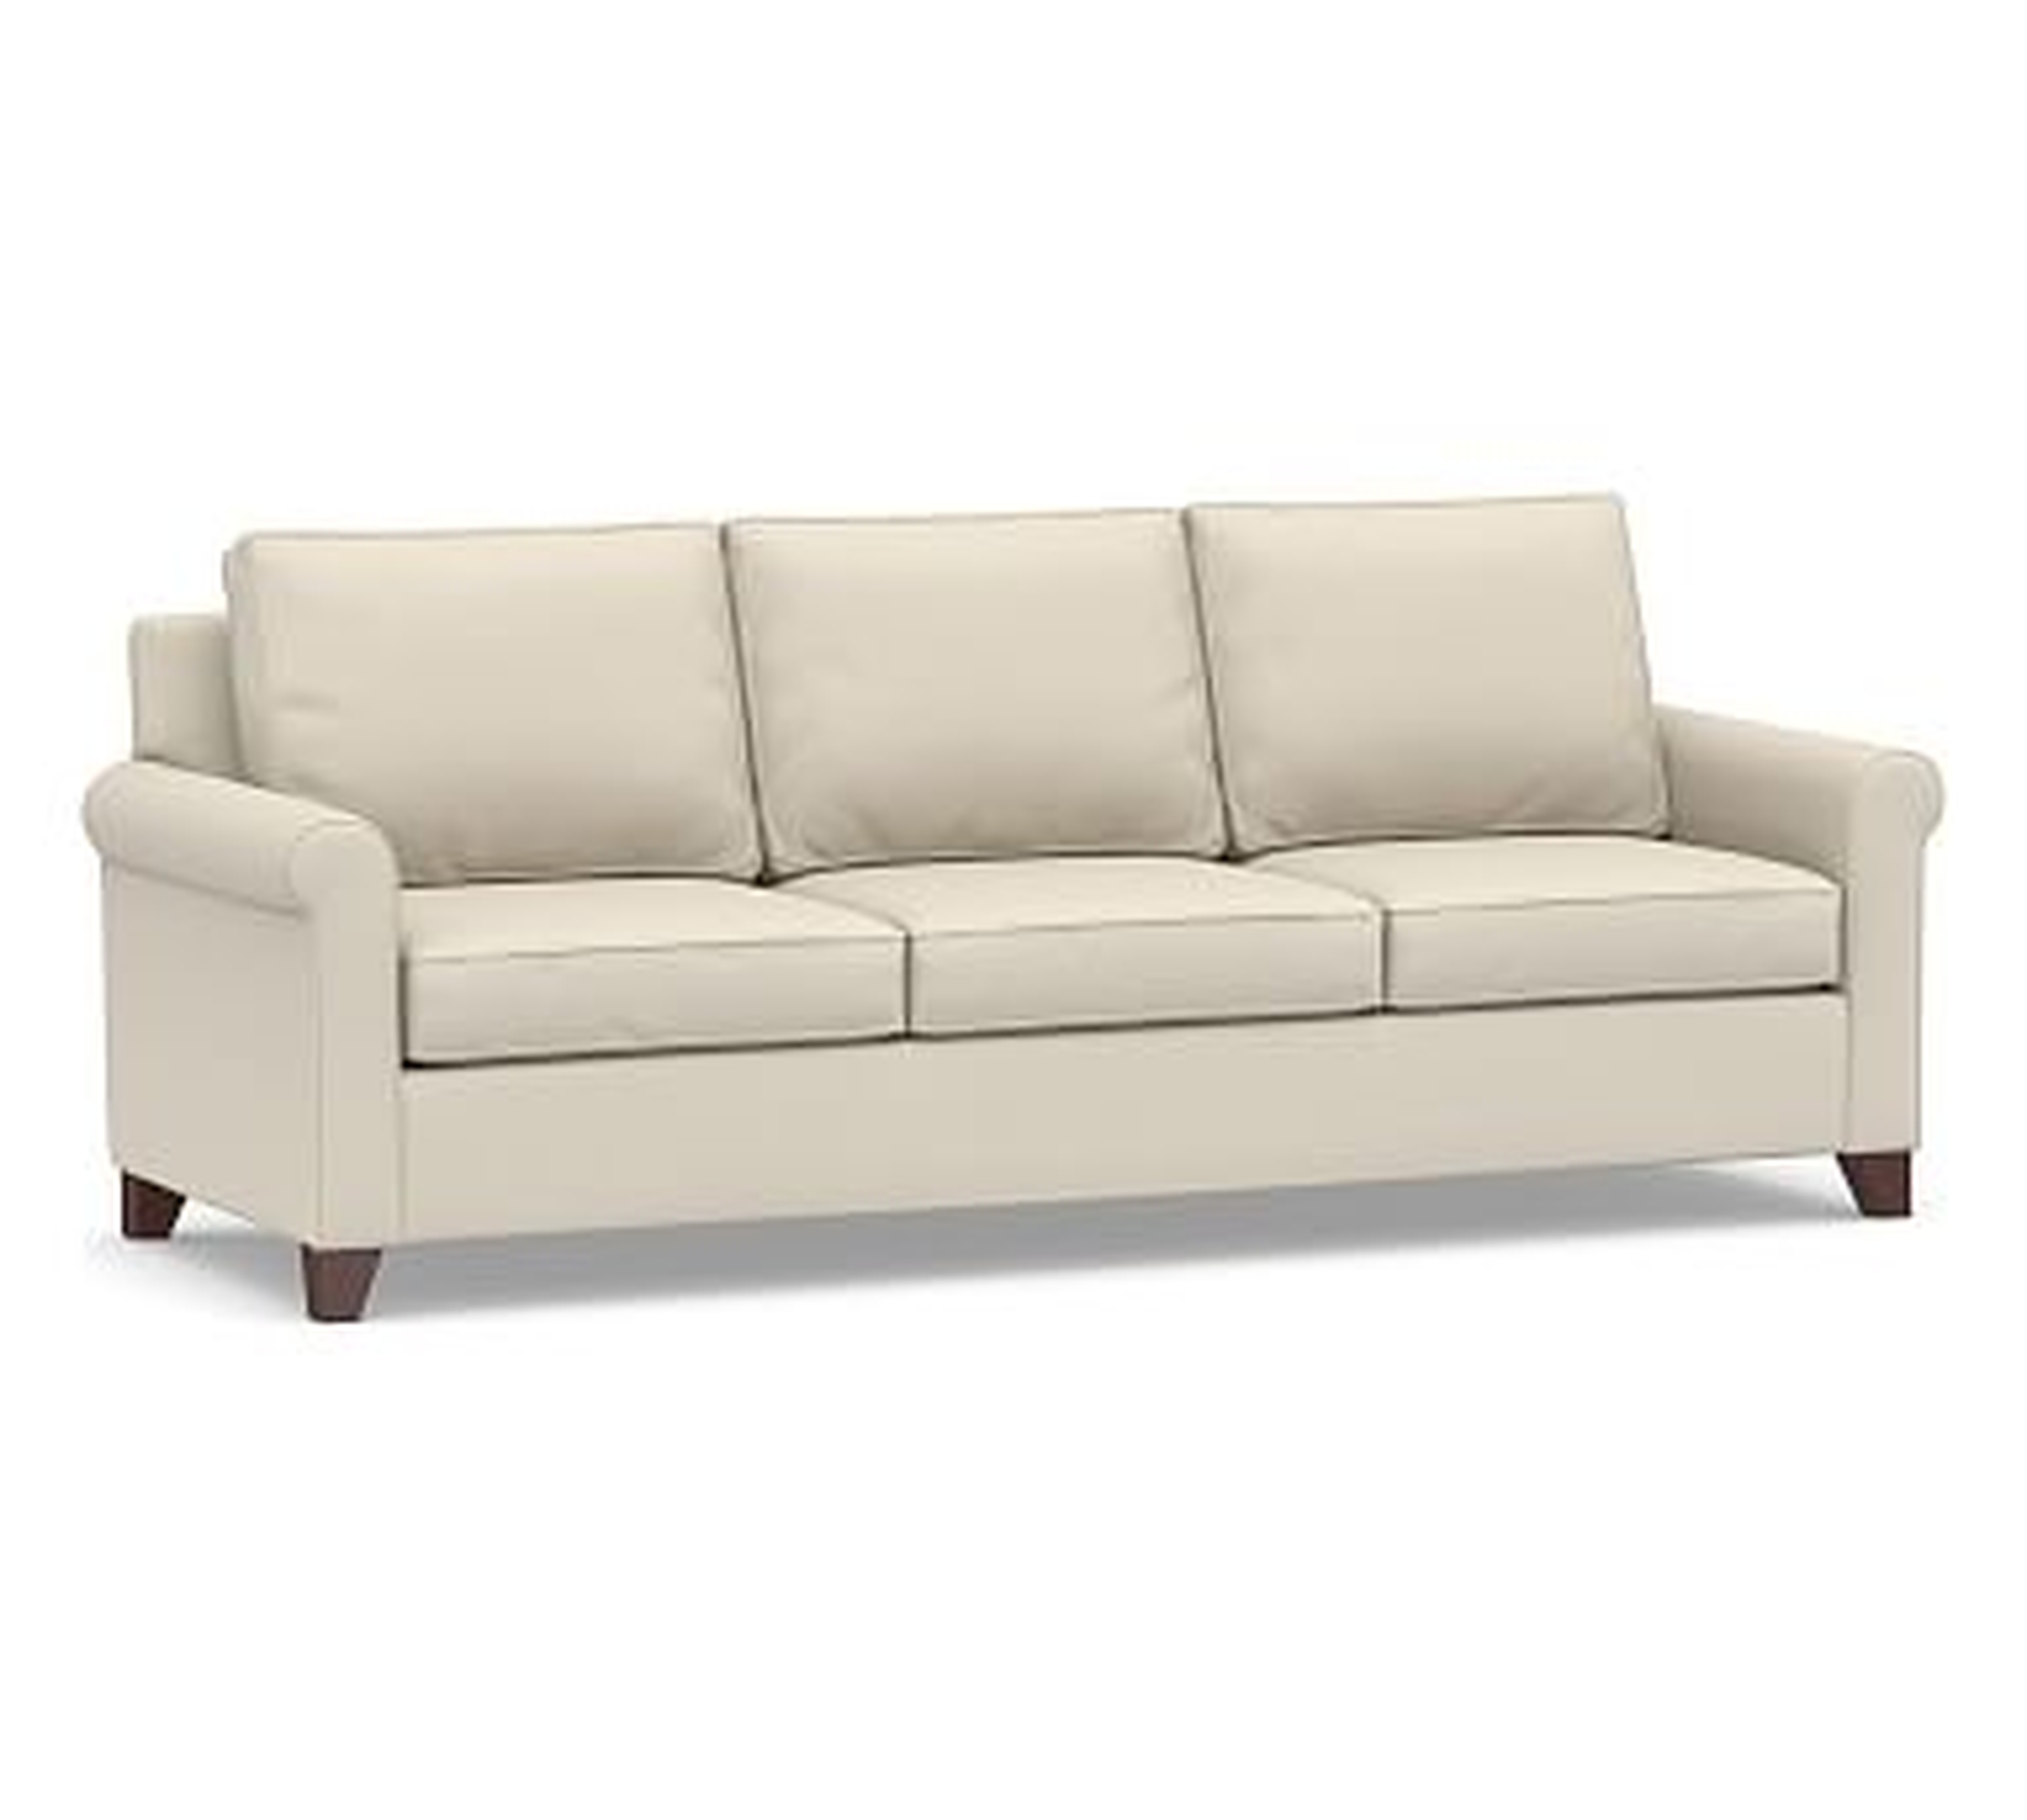 Cameron Roll Arm Upholstered Sofa, Polyester Wrapped Cushions, Performance Brushed Basketweave Ivory - Pottery Barn